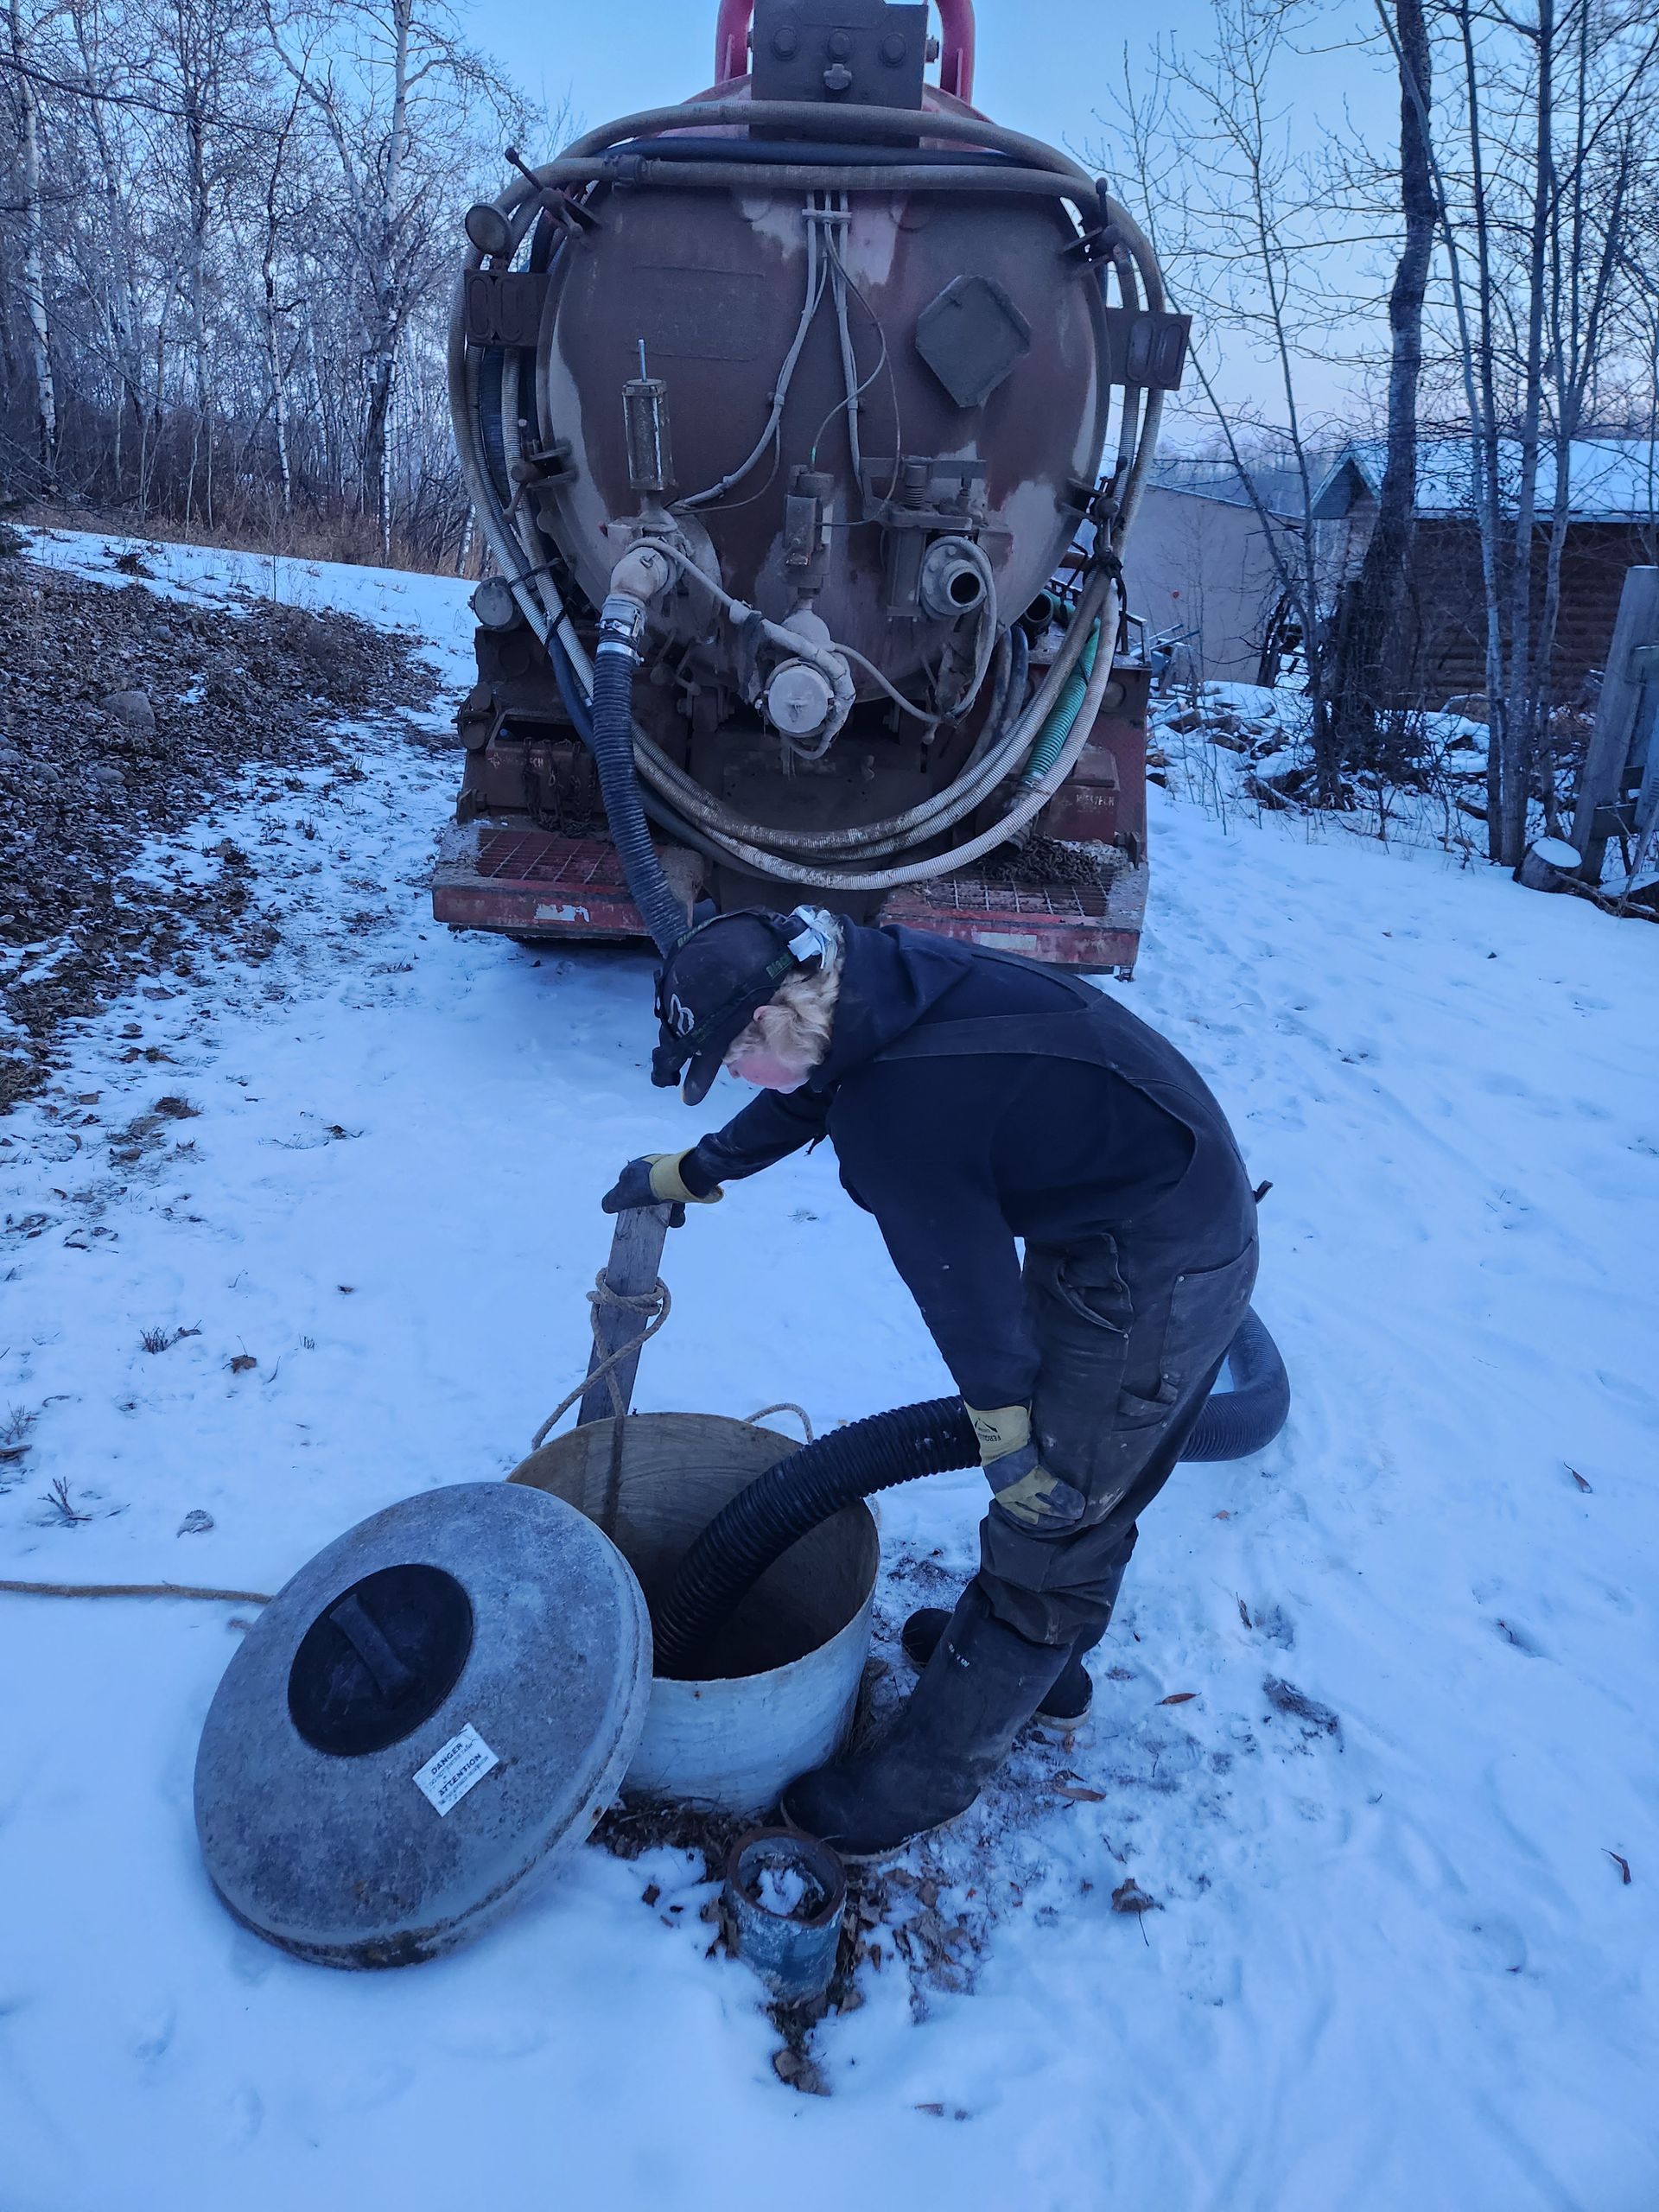 A man is working on a septic tank in the snow.